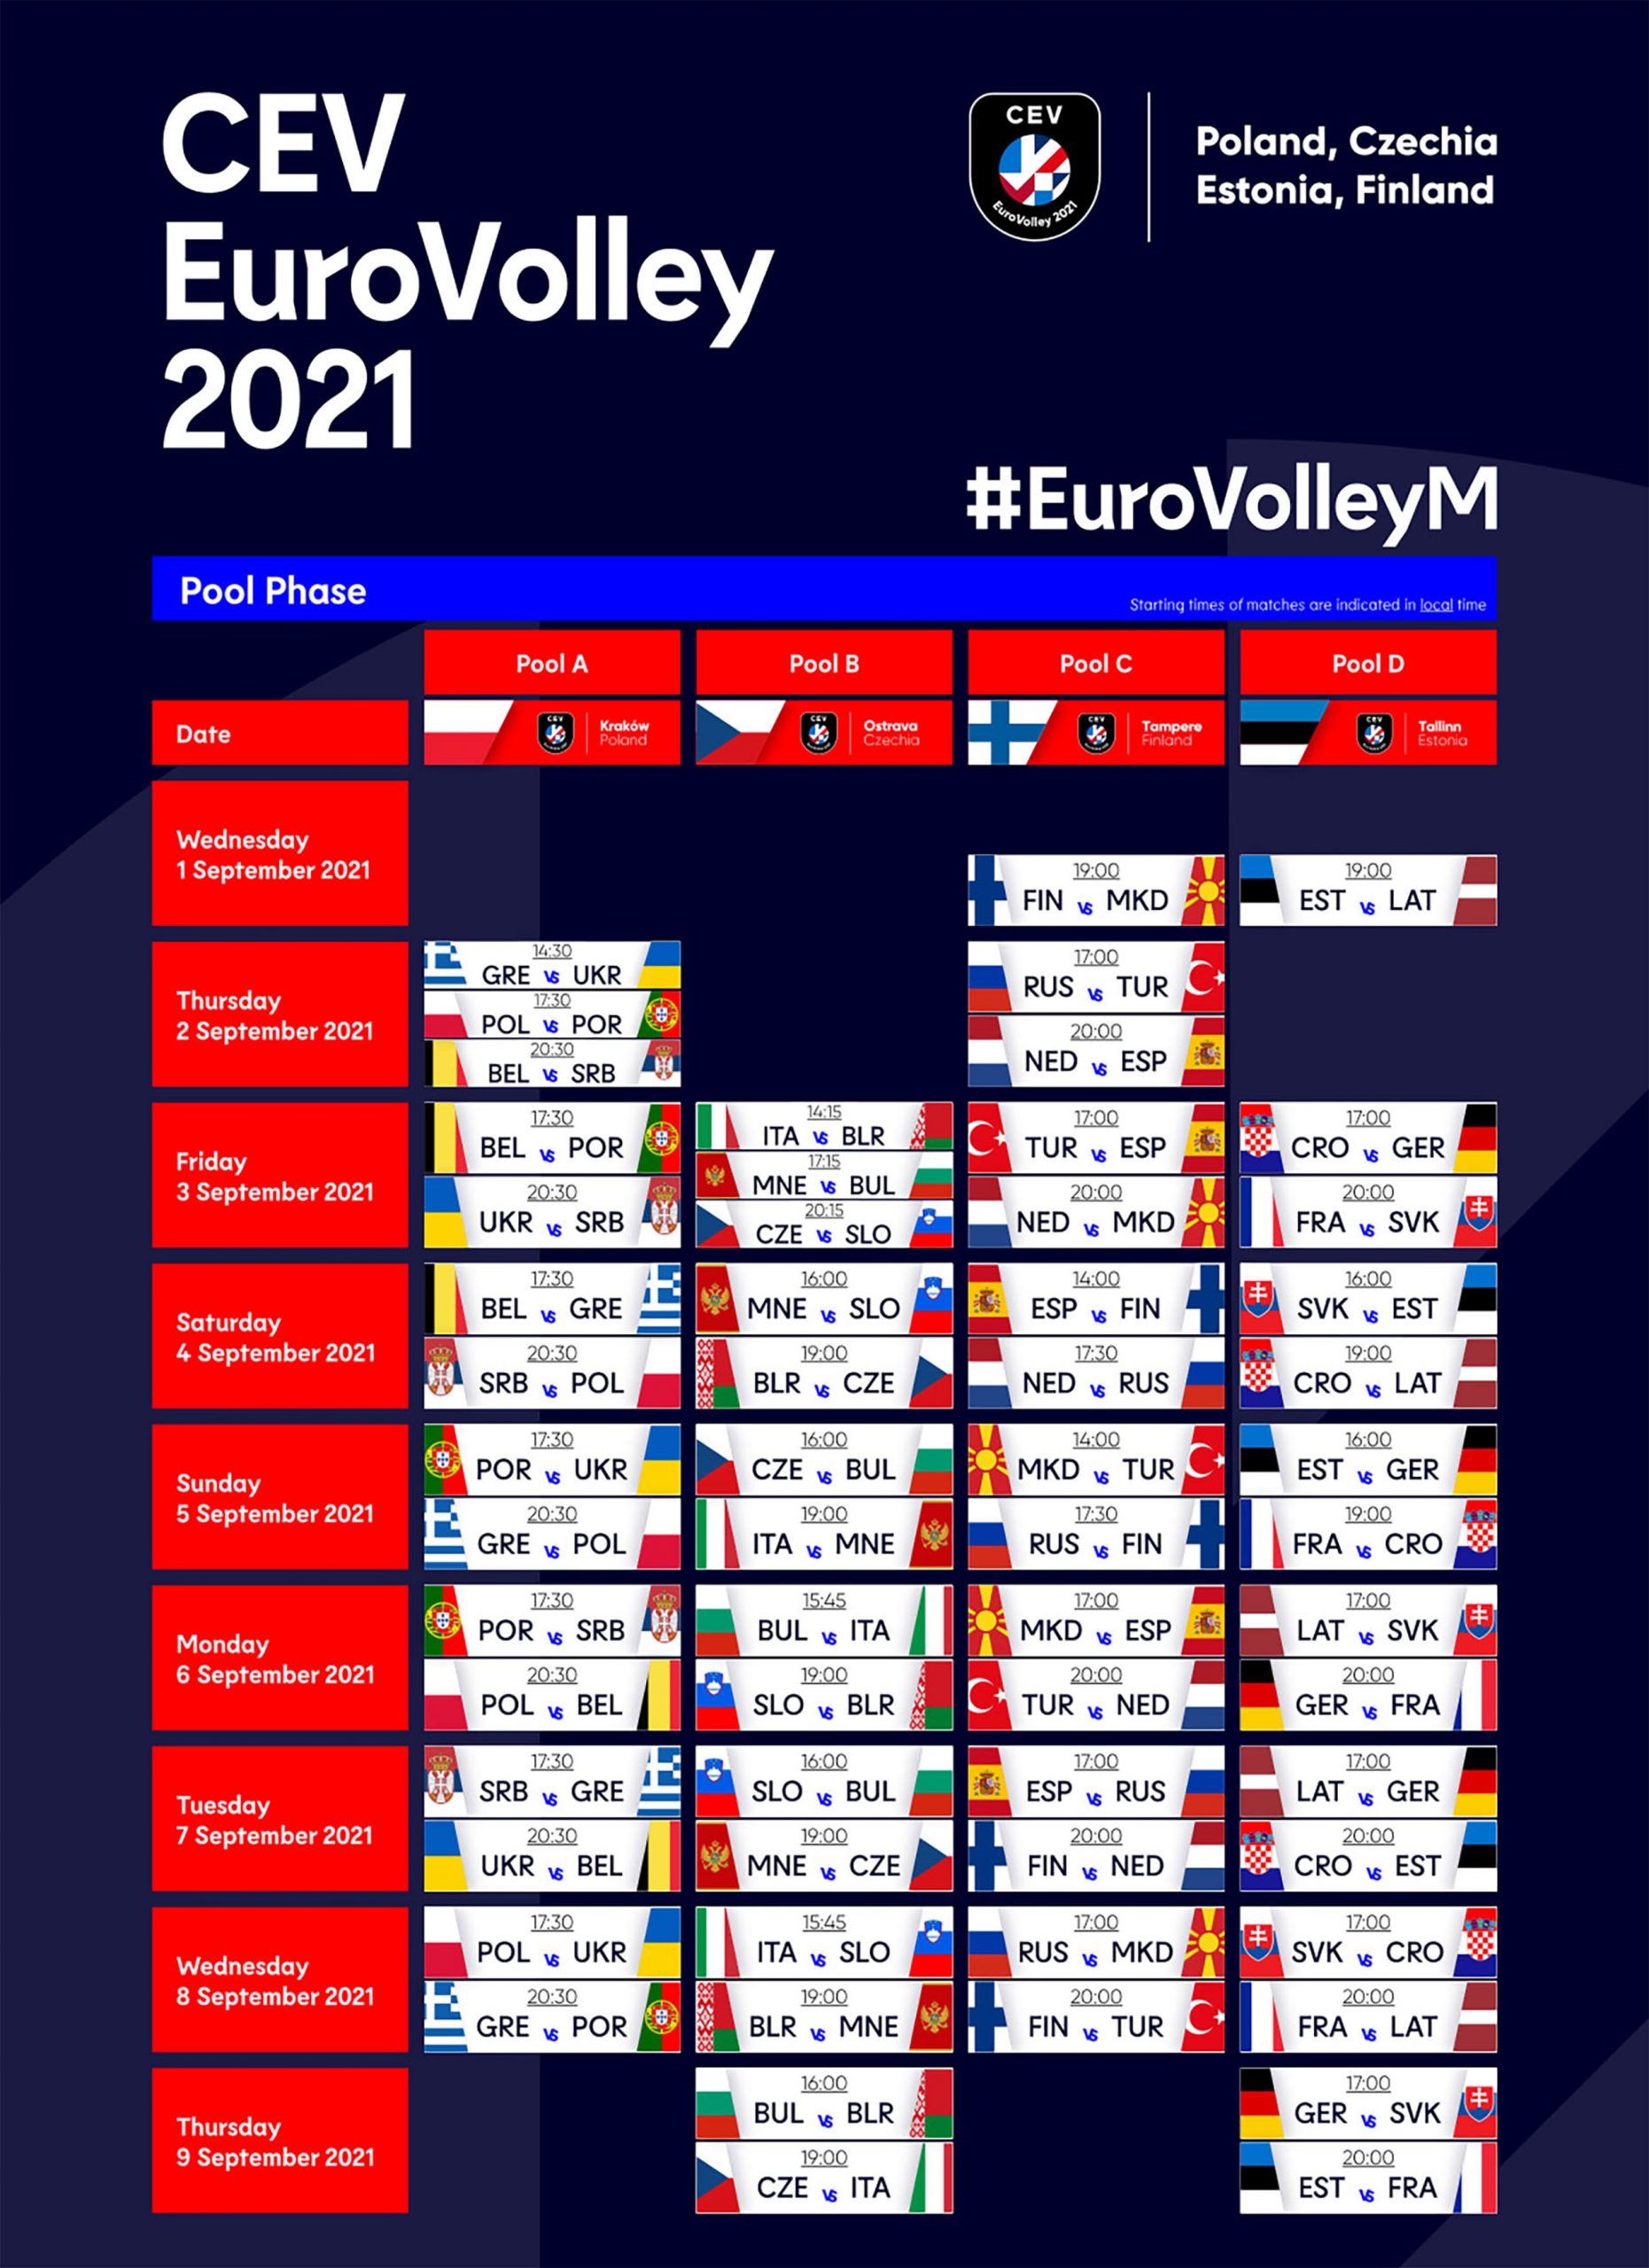 WorldofVolley SRB M List of the Serbian national team for